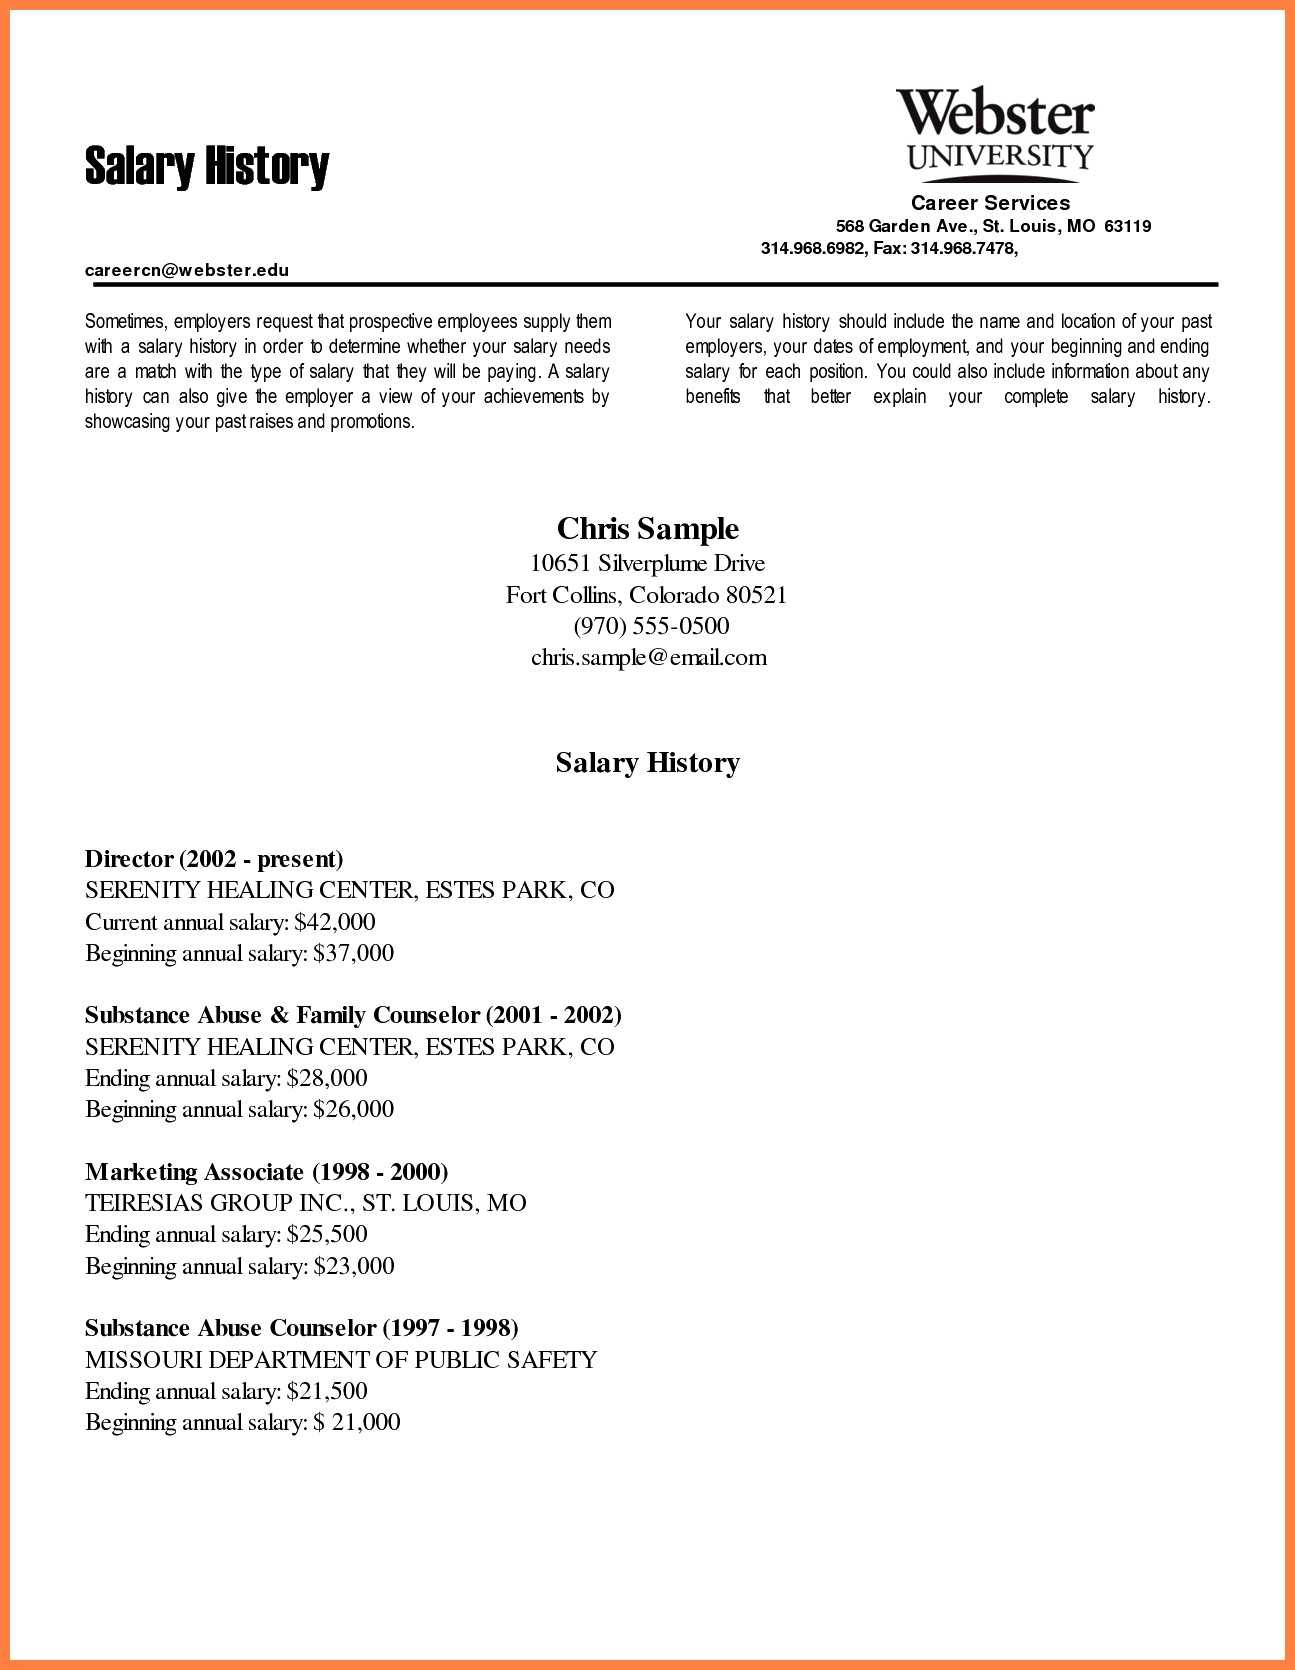 Substance Abuse Group Worksheets Along with Salary History Template Intoysearch